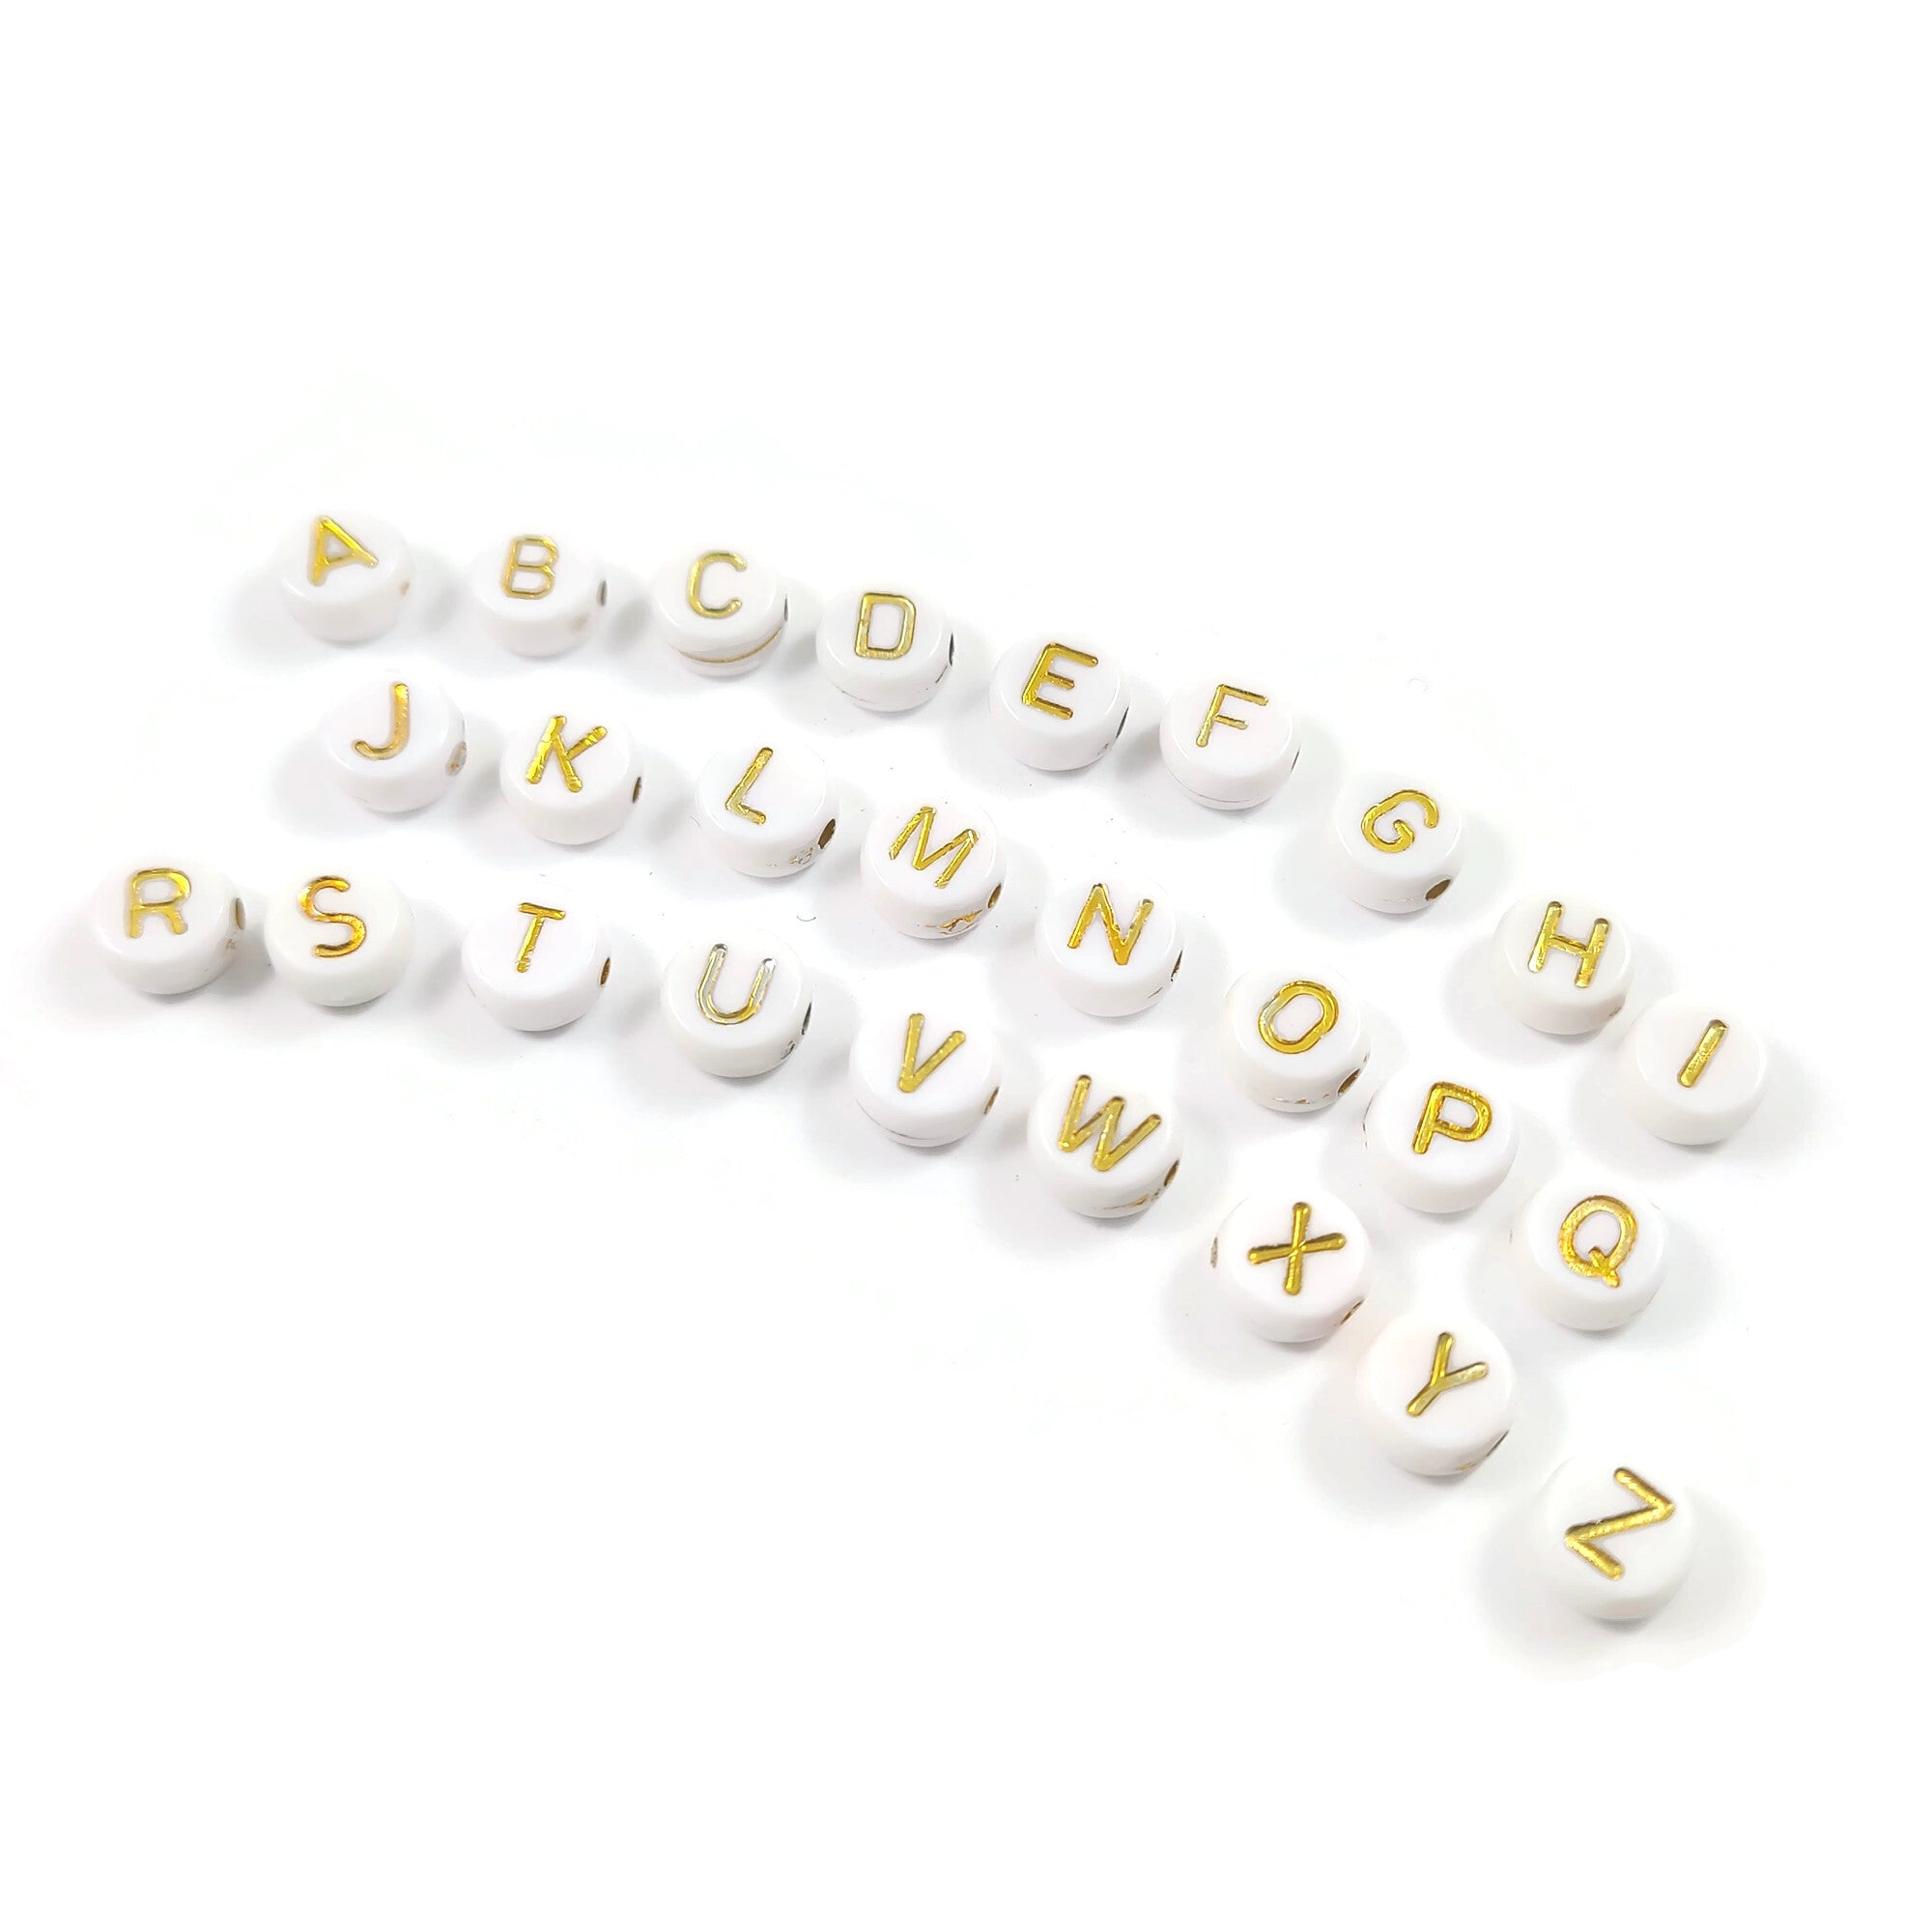 Colorful Round Letter Beads Acrylic Alphabet Beads with White